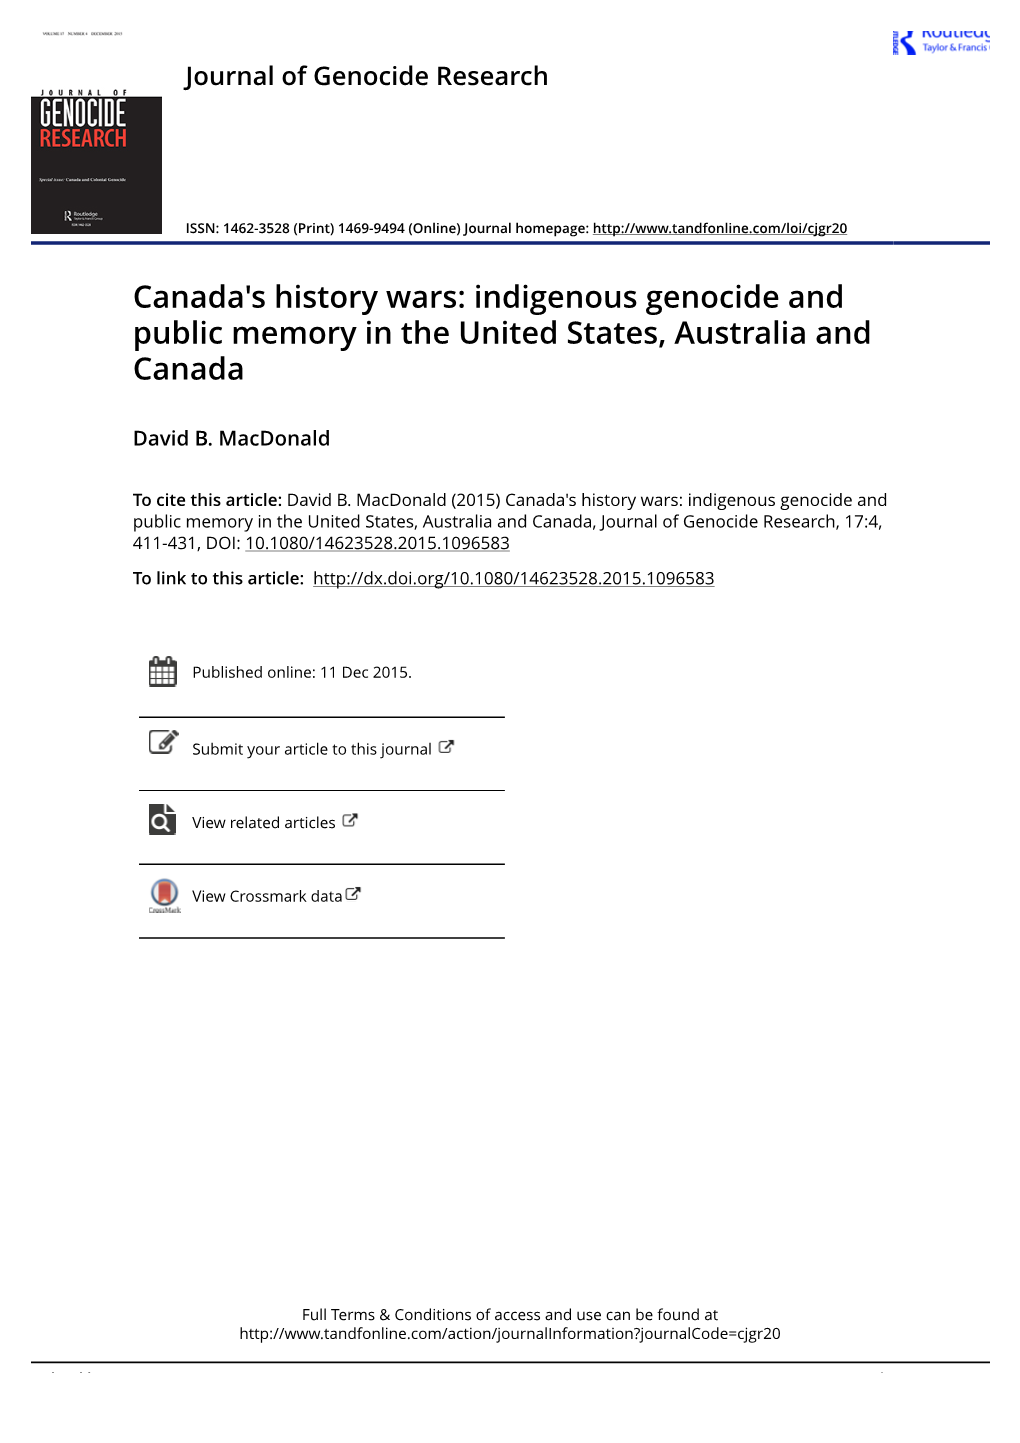 Canada's History War: Indigenous Genocide and Public Memory in The